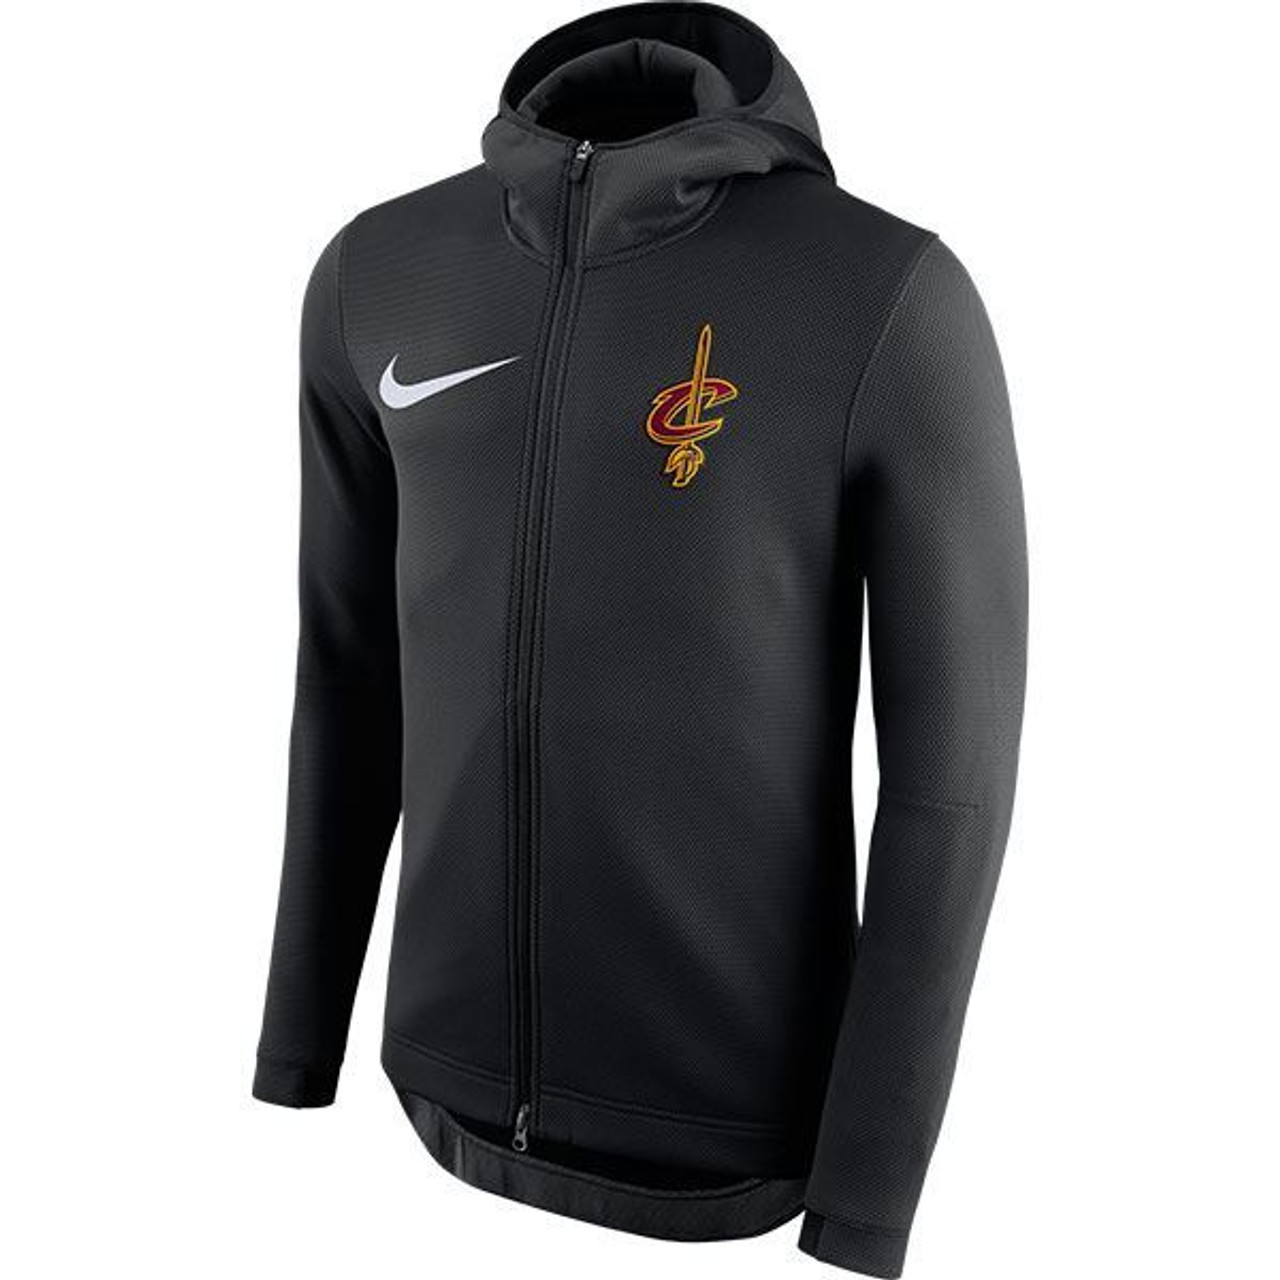 [2018-19] Nike Black ThermaFlex Showtime Hoodie - Cleveland Cavaliers